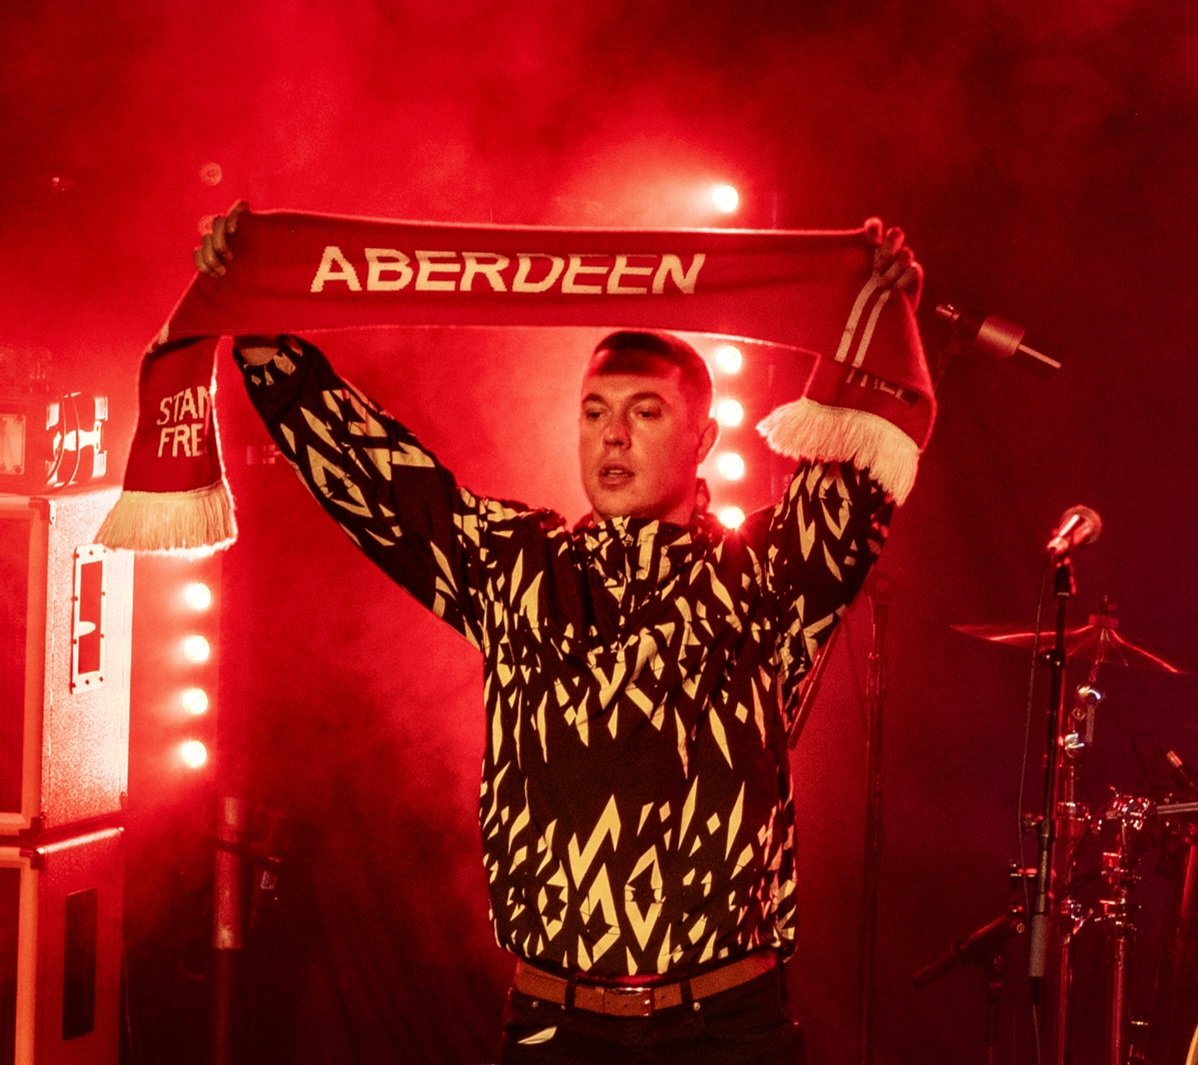 🆎ABERDEEN🆎 TICKETS FLYING! LESS THAN 100 REMAIN A week on Saturday at the Beach Ballroom ⛱️ Retweet to win a Skylights/Aberdeen retro shirt ticketmaster.co.uk/skylights-aber… 📸@JustinLeeming #ASAW